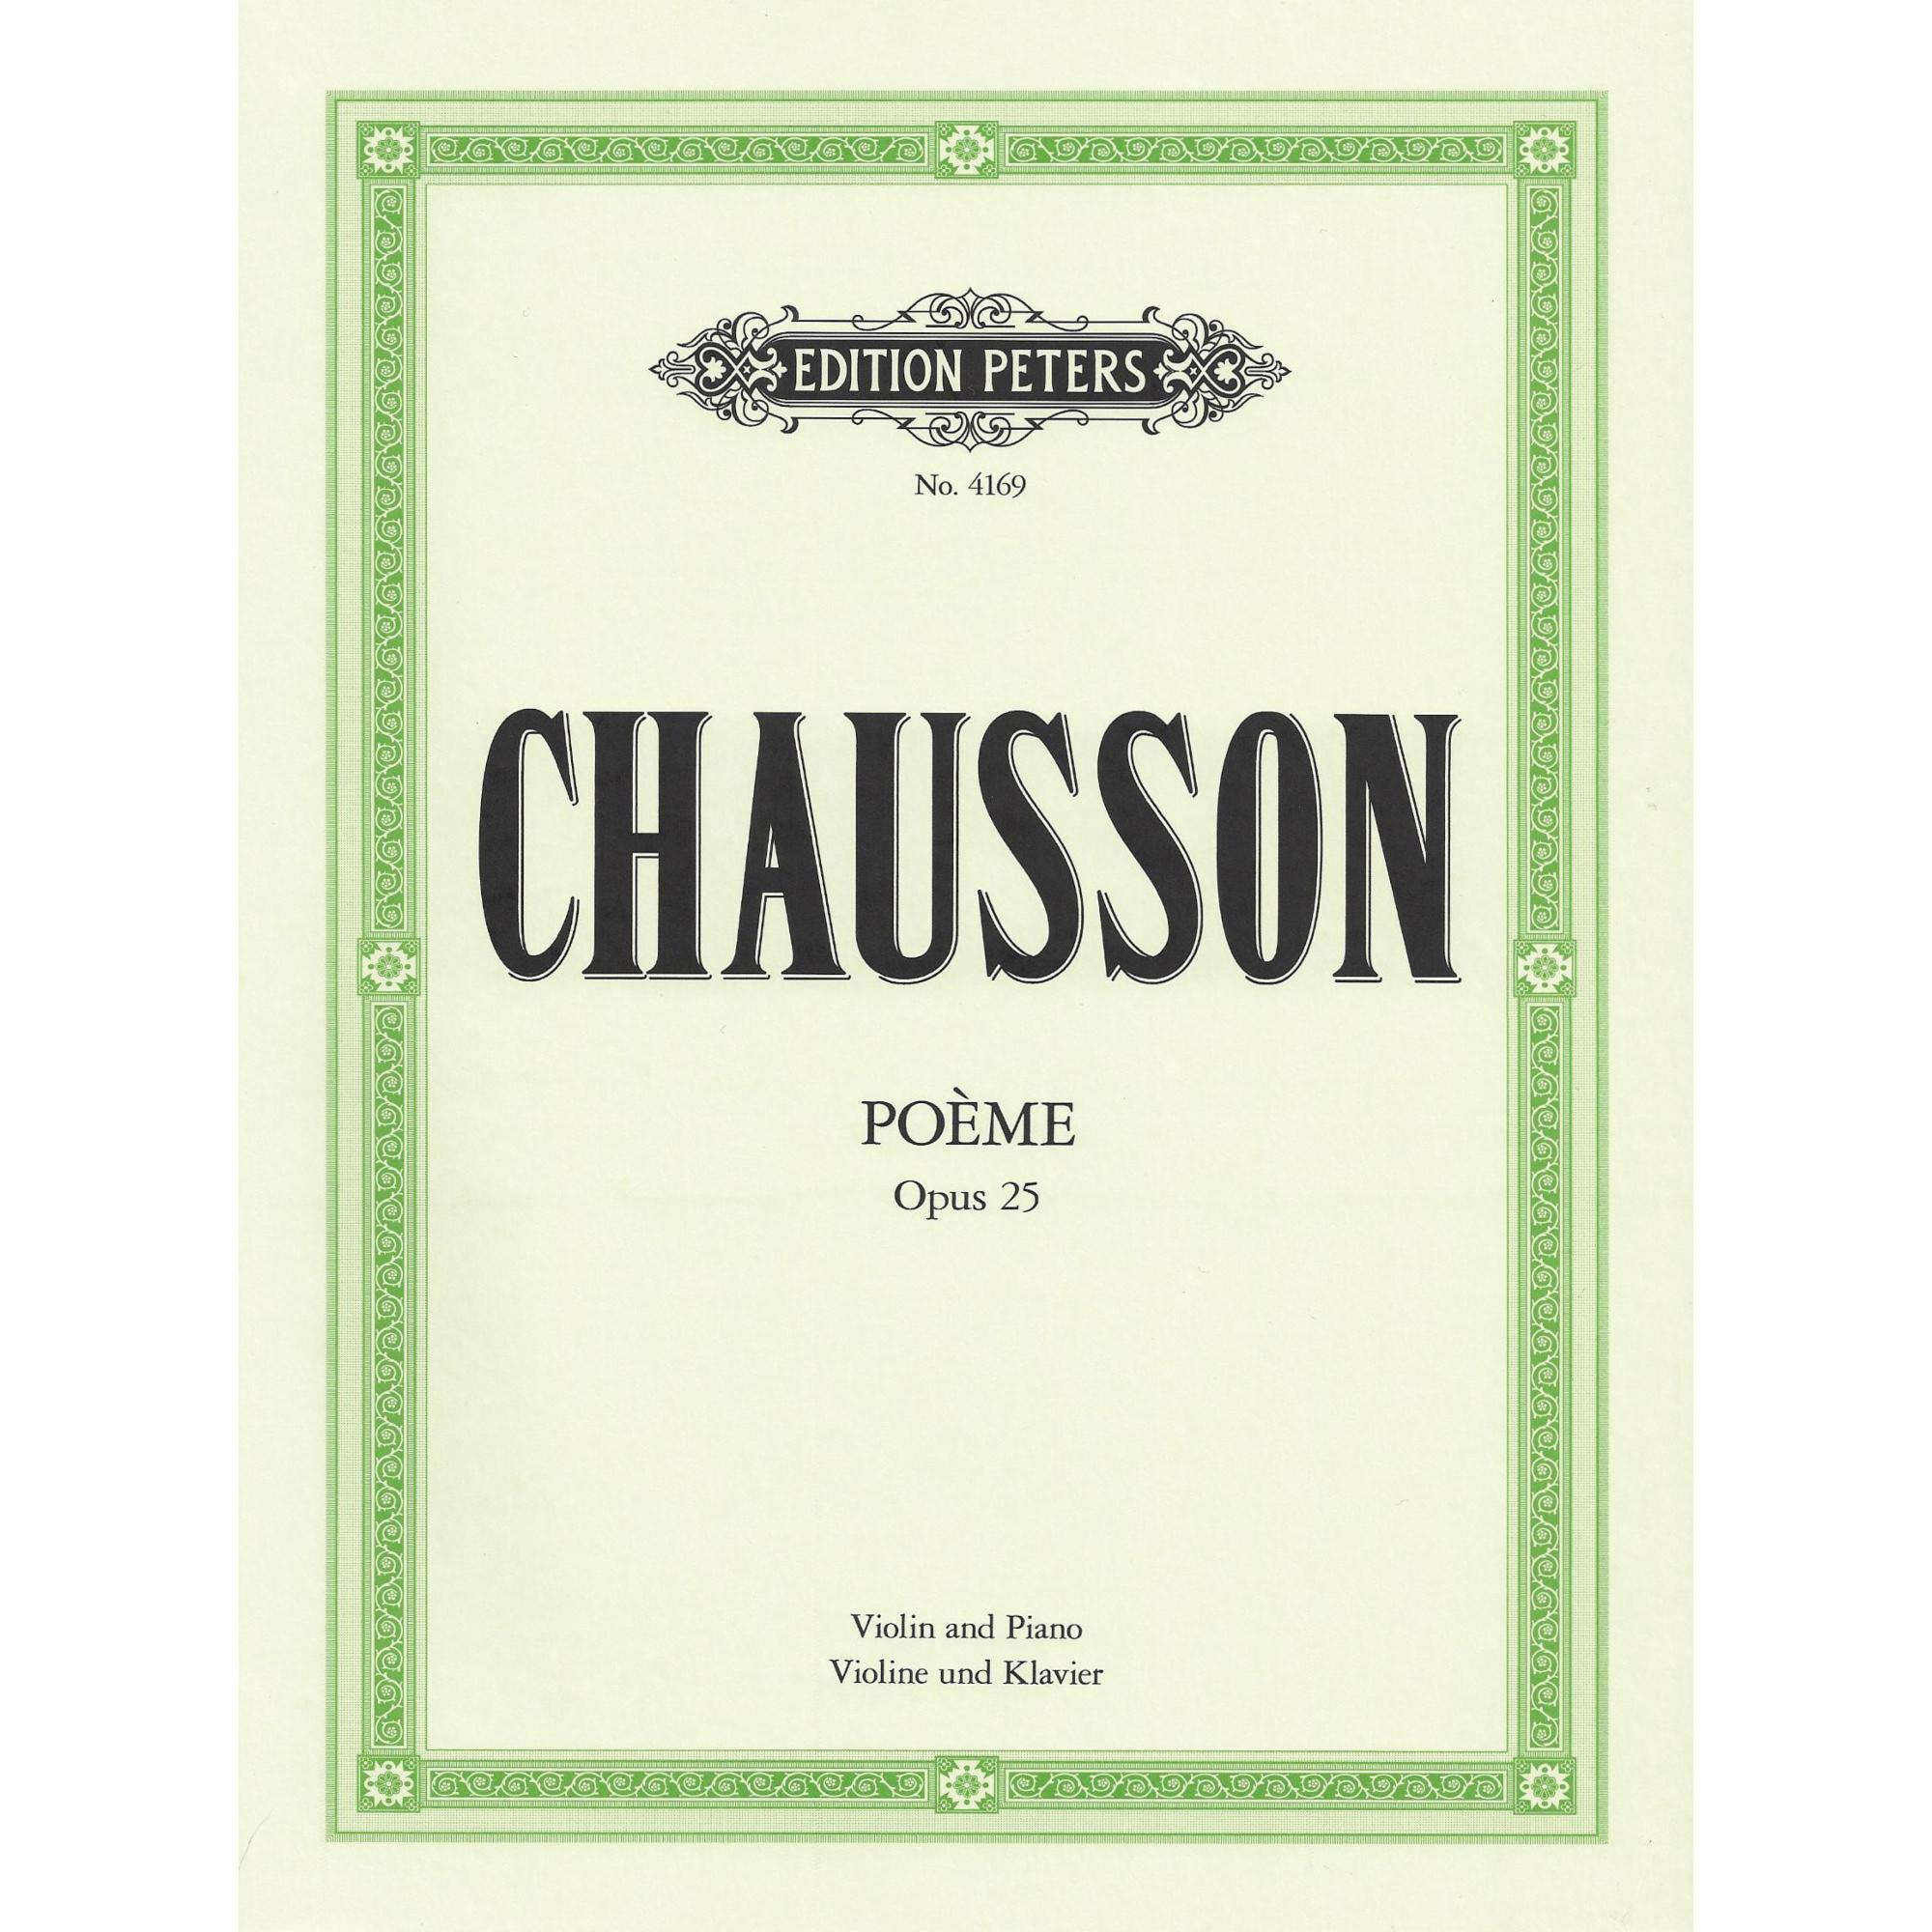 Chausson -- Poeme, Op. 25 for Violin and Piano